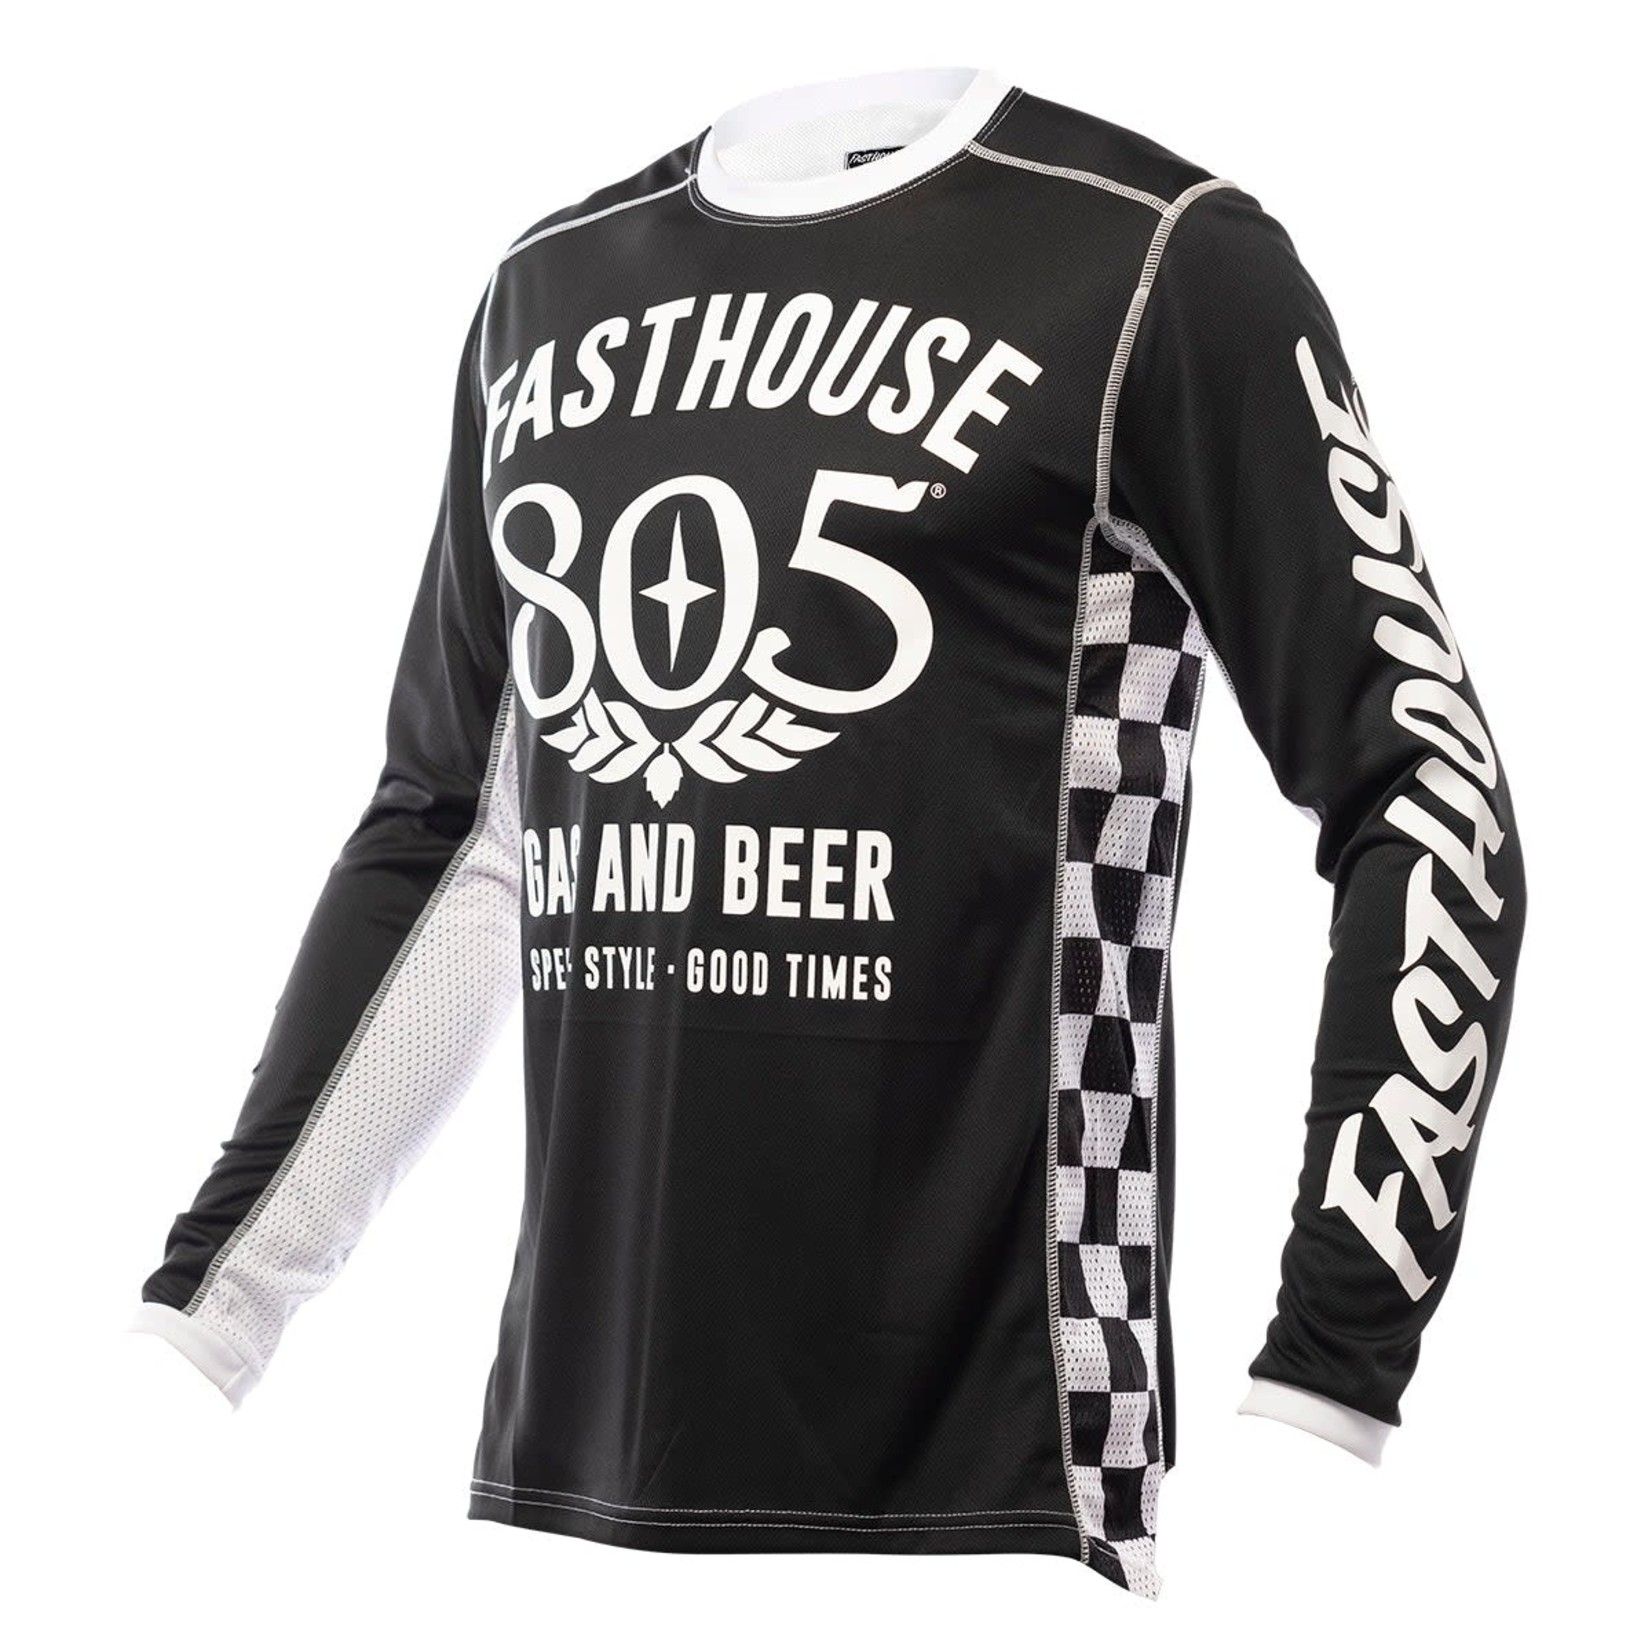 FASTHOUSE Grindhouse 805 Jersey Black